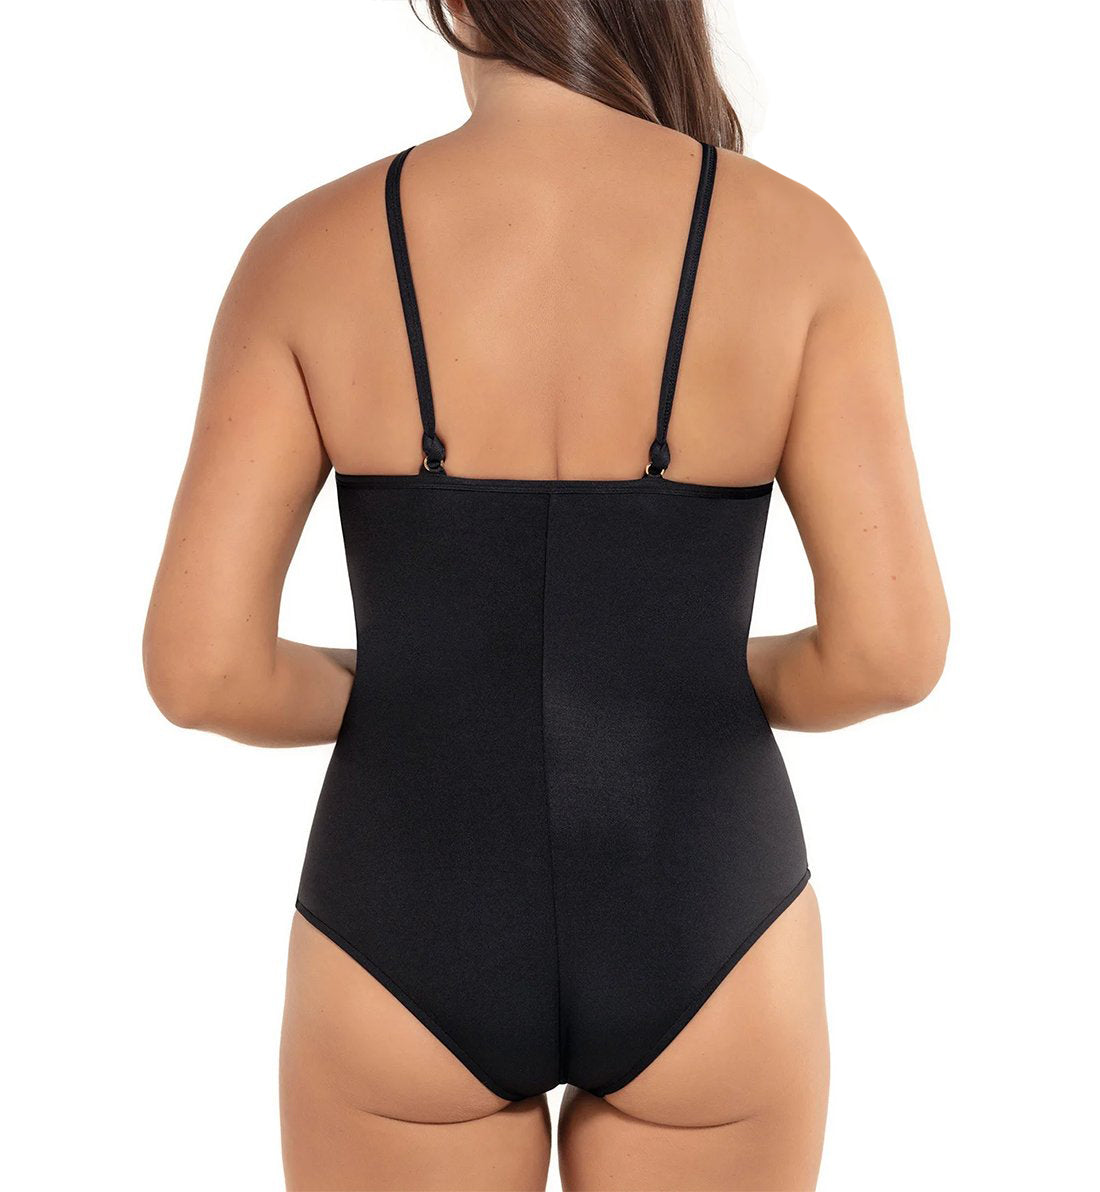 Leonisa Lace High Neck One Piece Swimsuit (190880),Small,Black - Black,Small